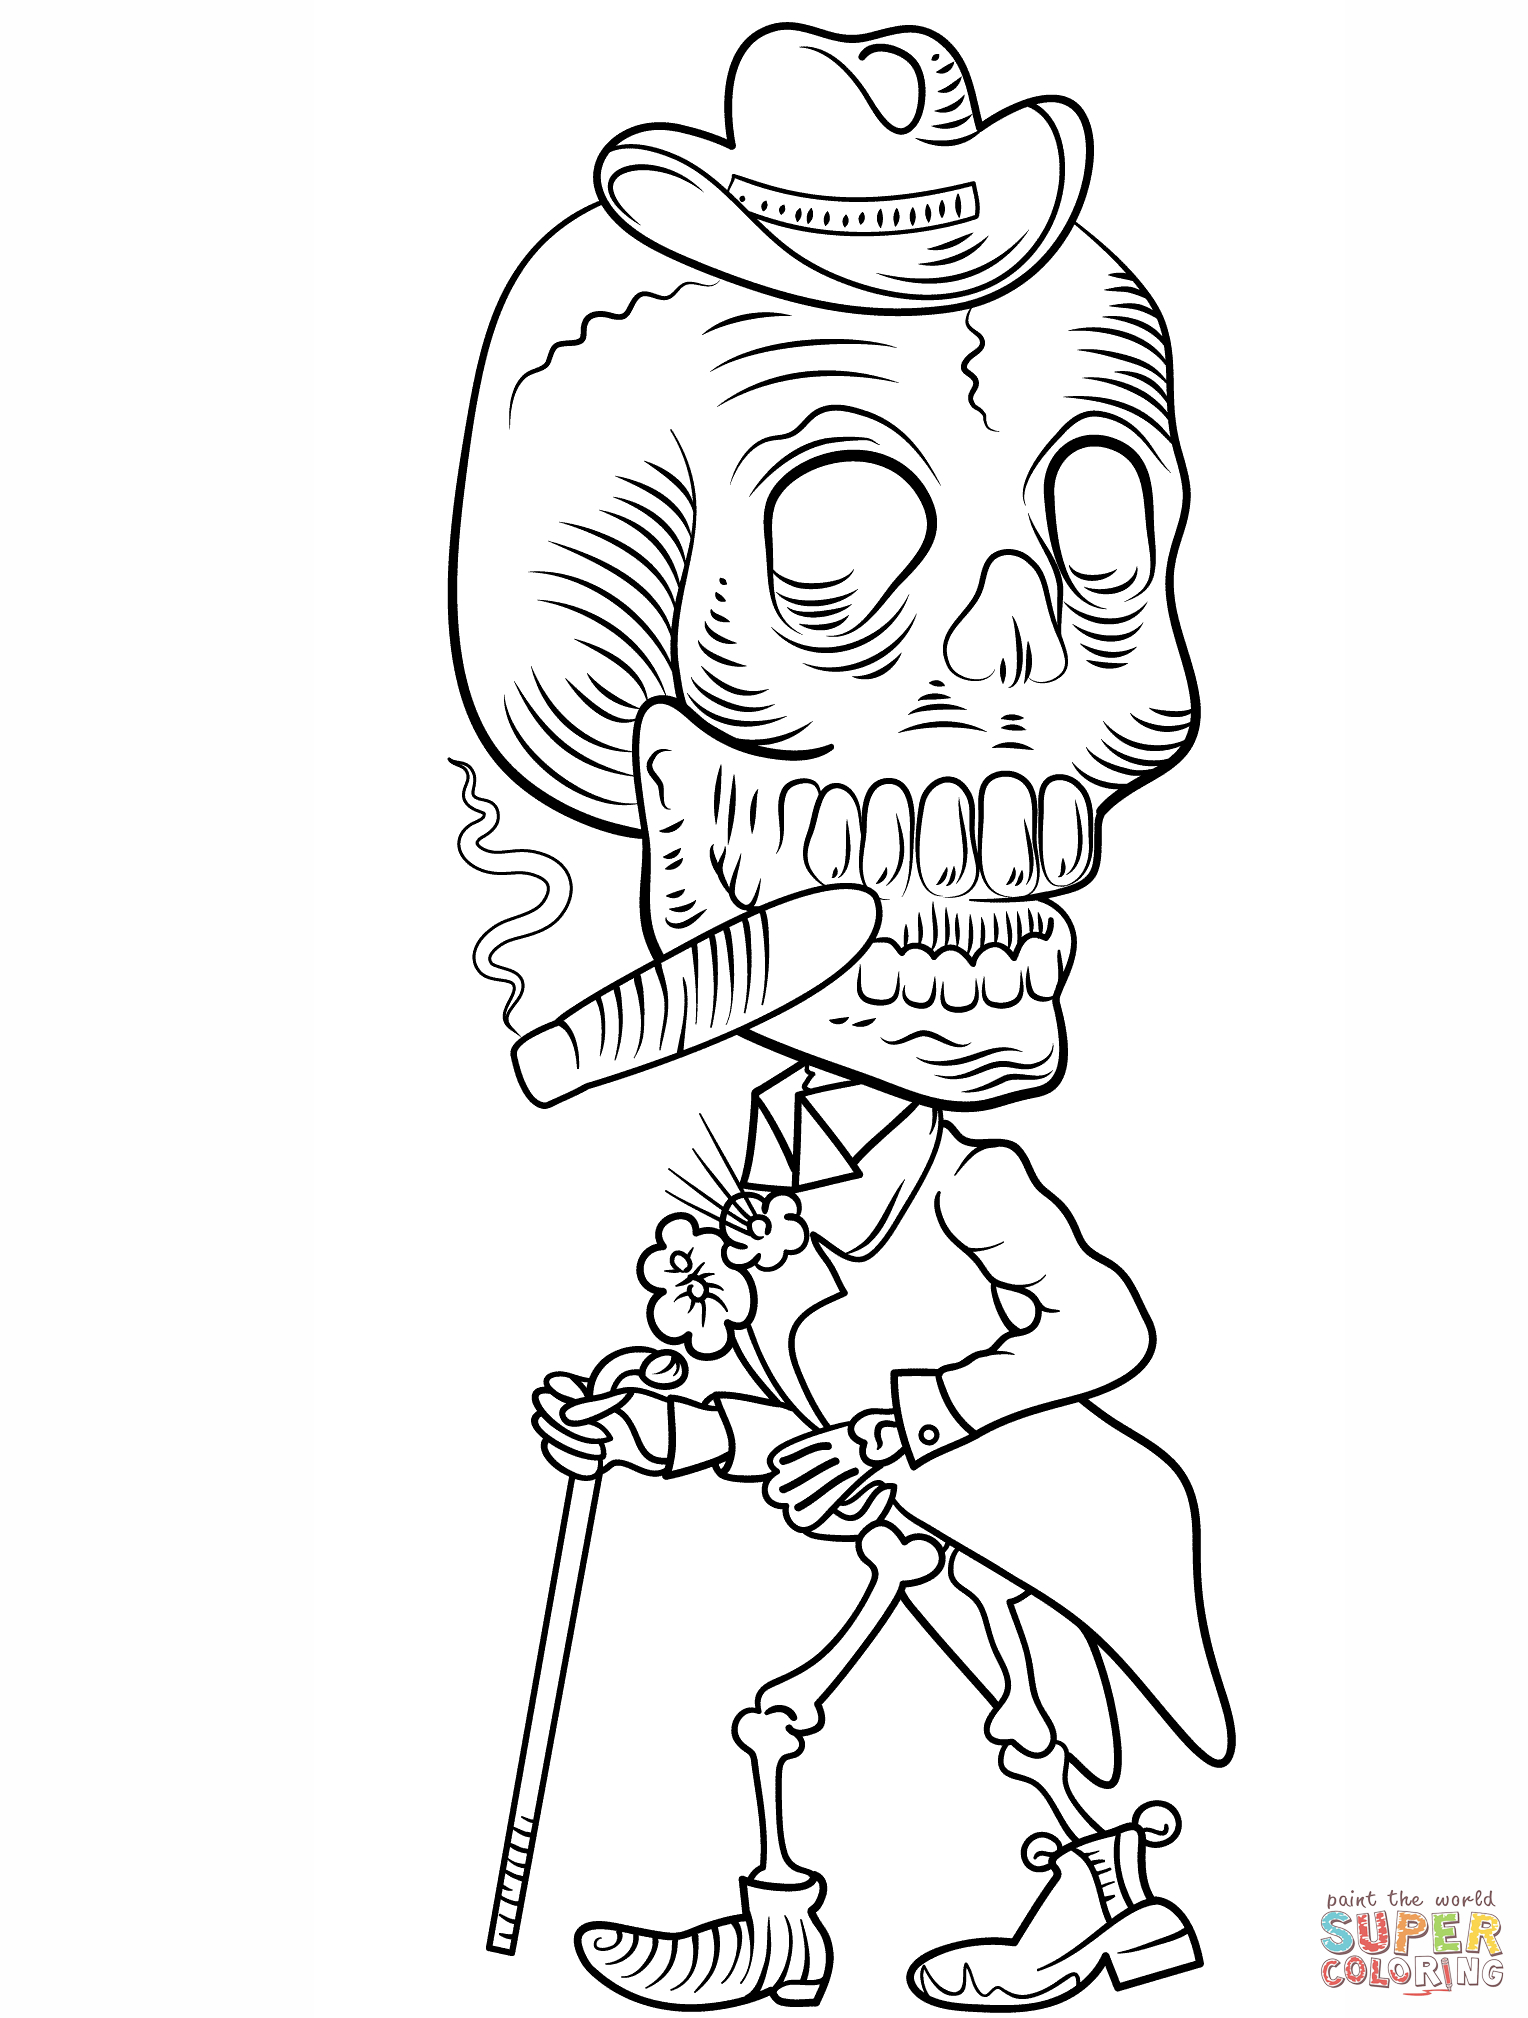 Day Of The Dead Skeleton Coloring Page | Free Printable Coloring Pages - Free Printable Day Of The Dead Coloring Pages